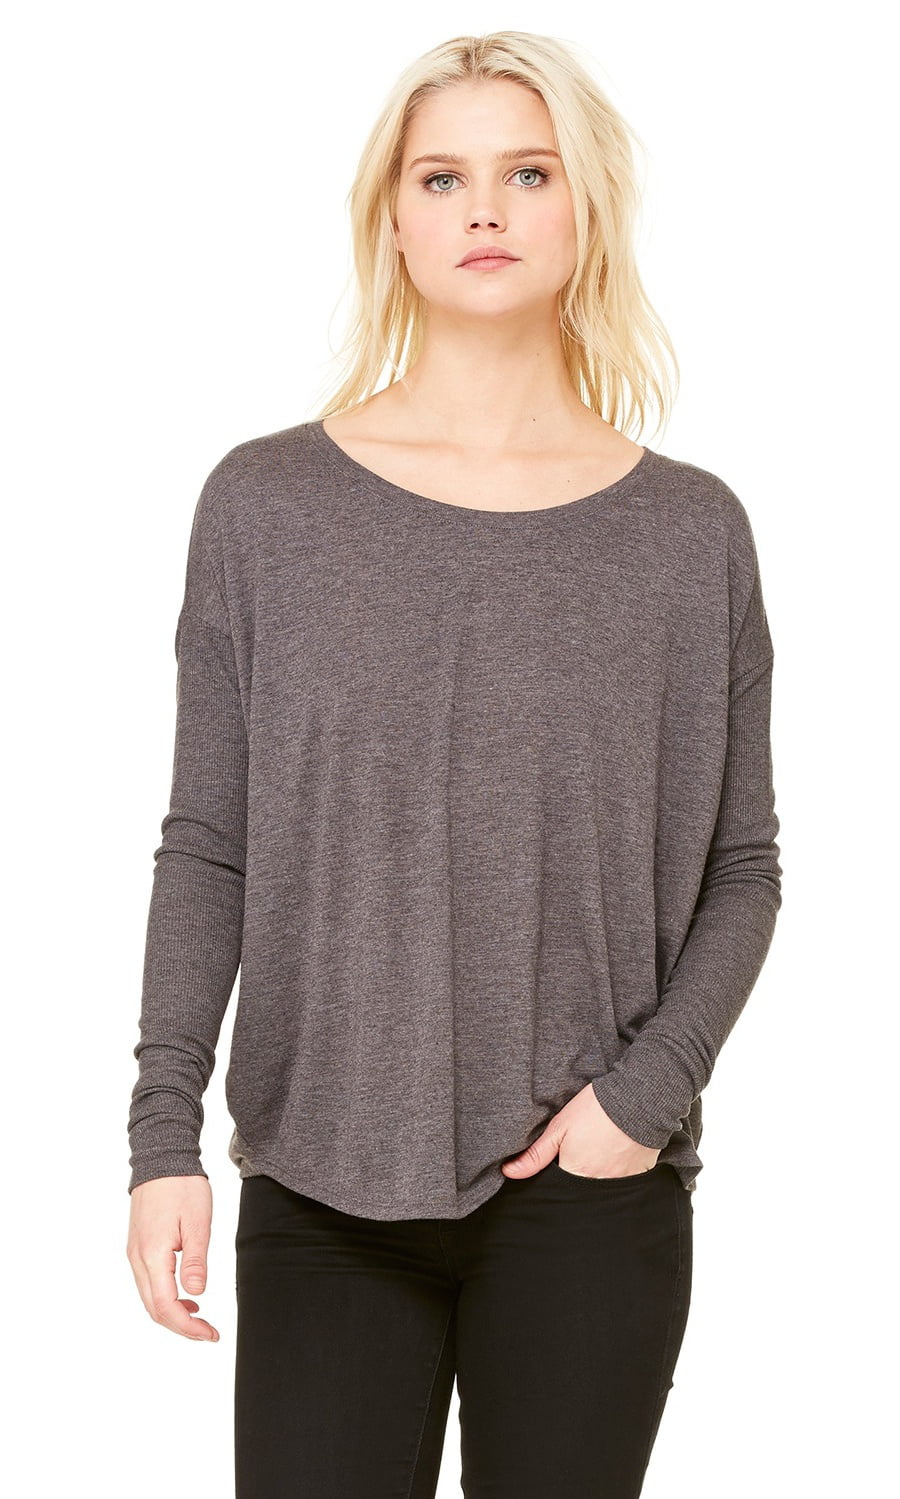 BELLA+CANVAS - The Bella + Canvas Ladies Flowy Long Sleeve T-Shirt with ...